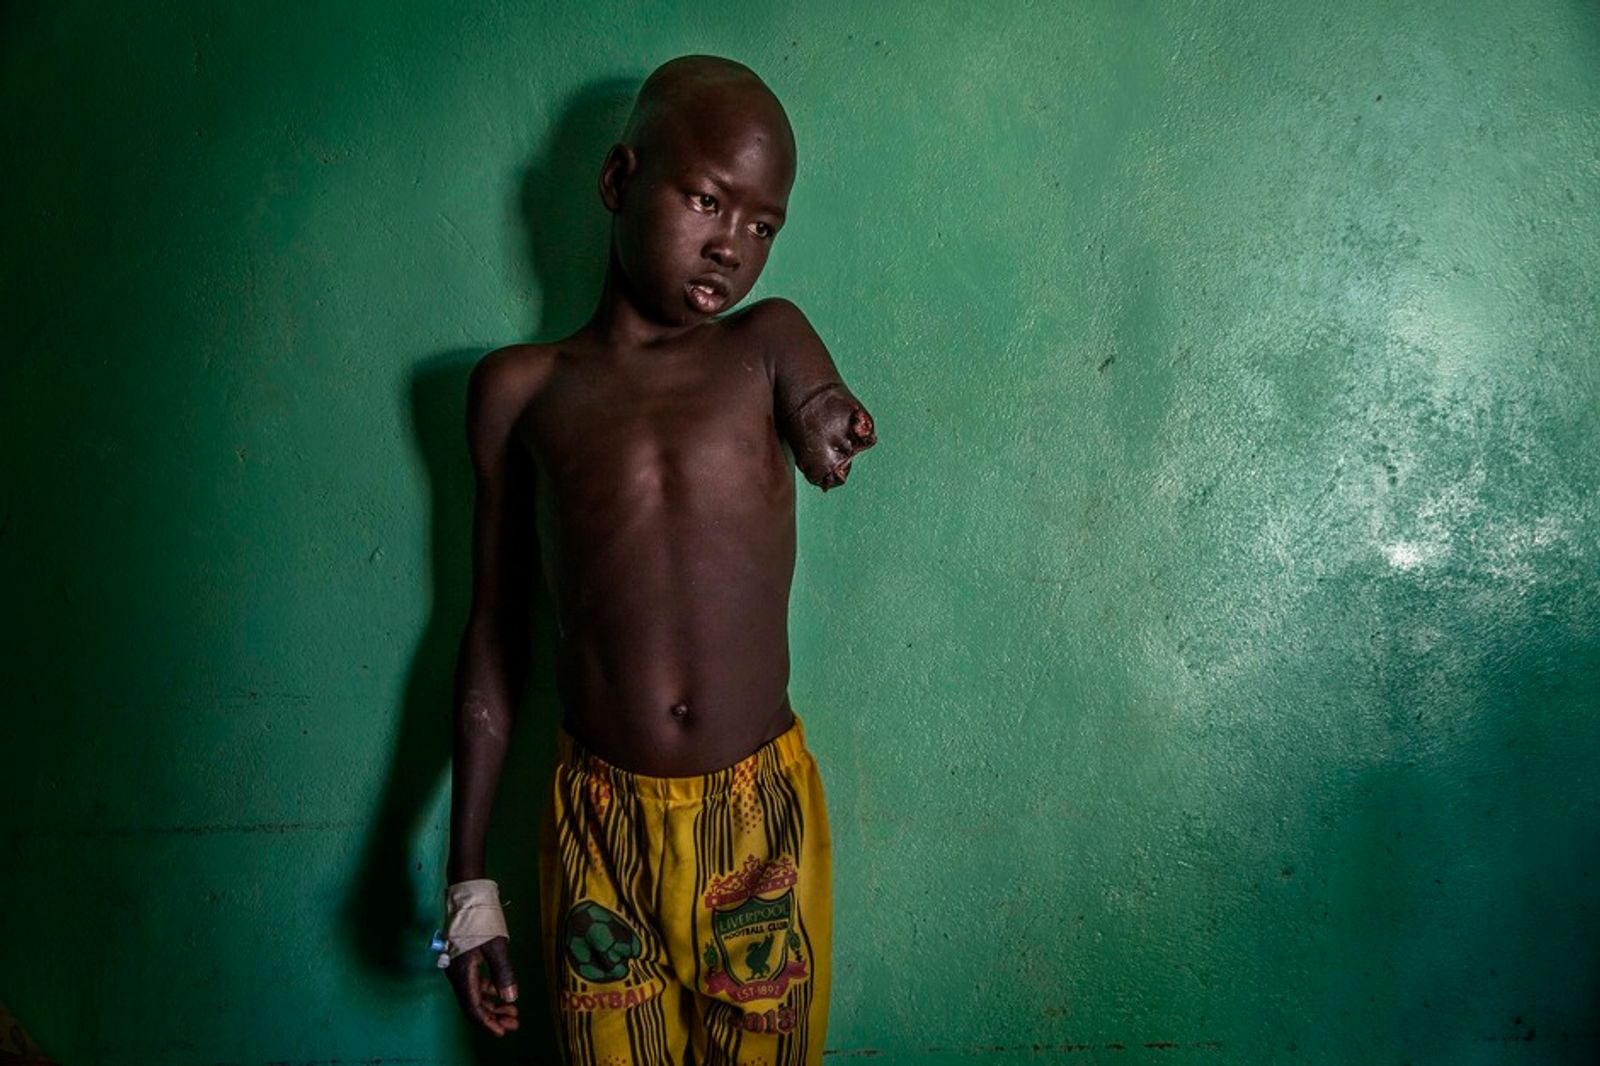 © Marco Gualazzini - Image from the Sudan Border War photography project